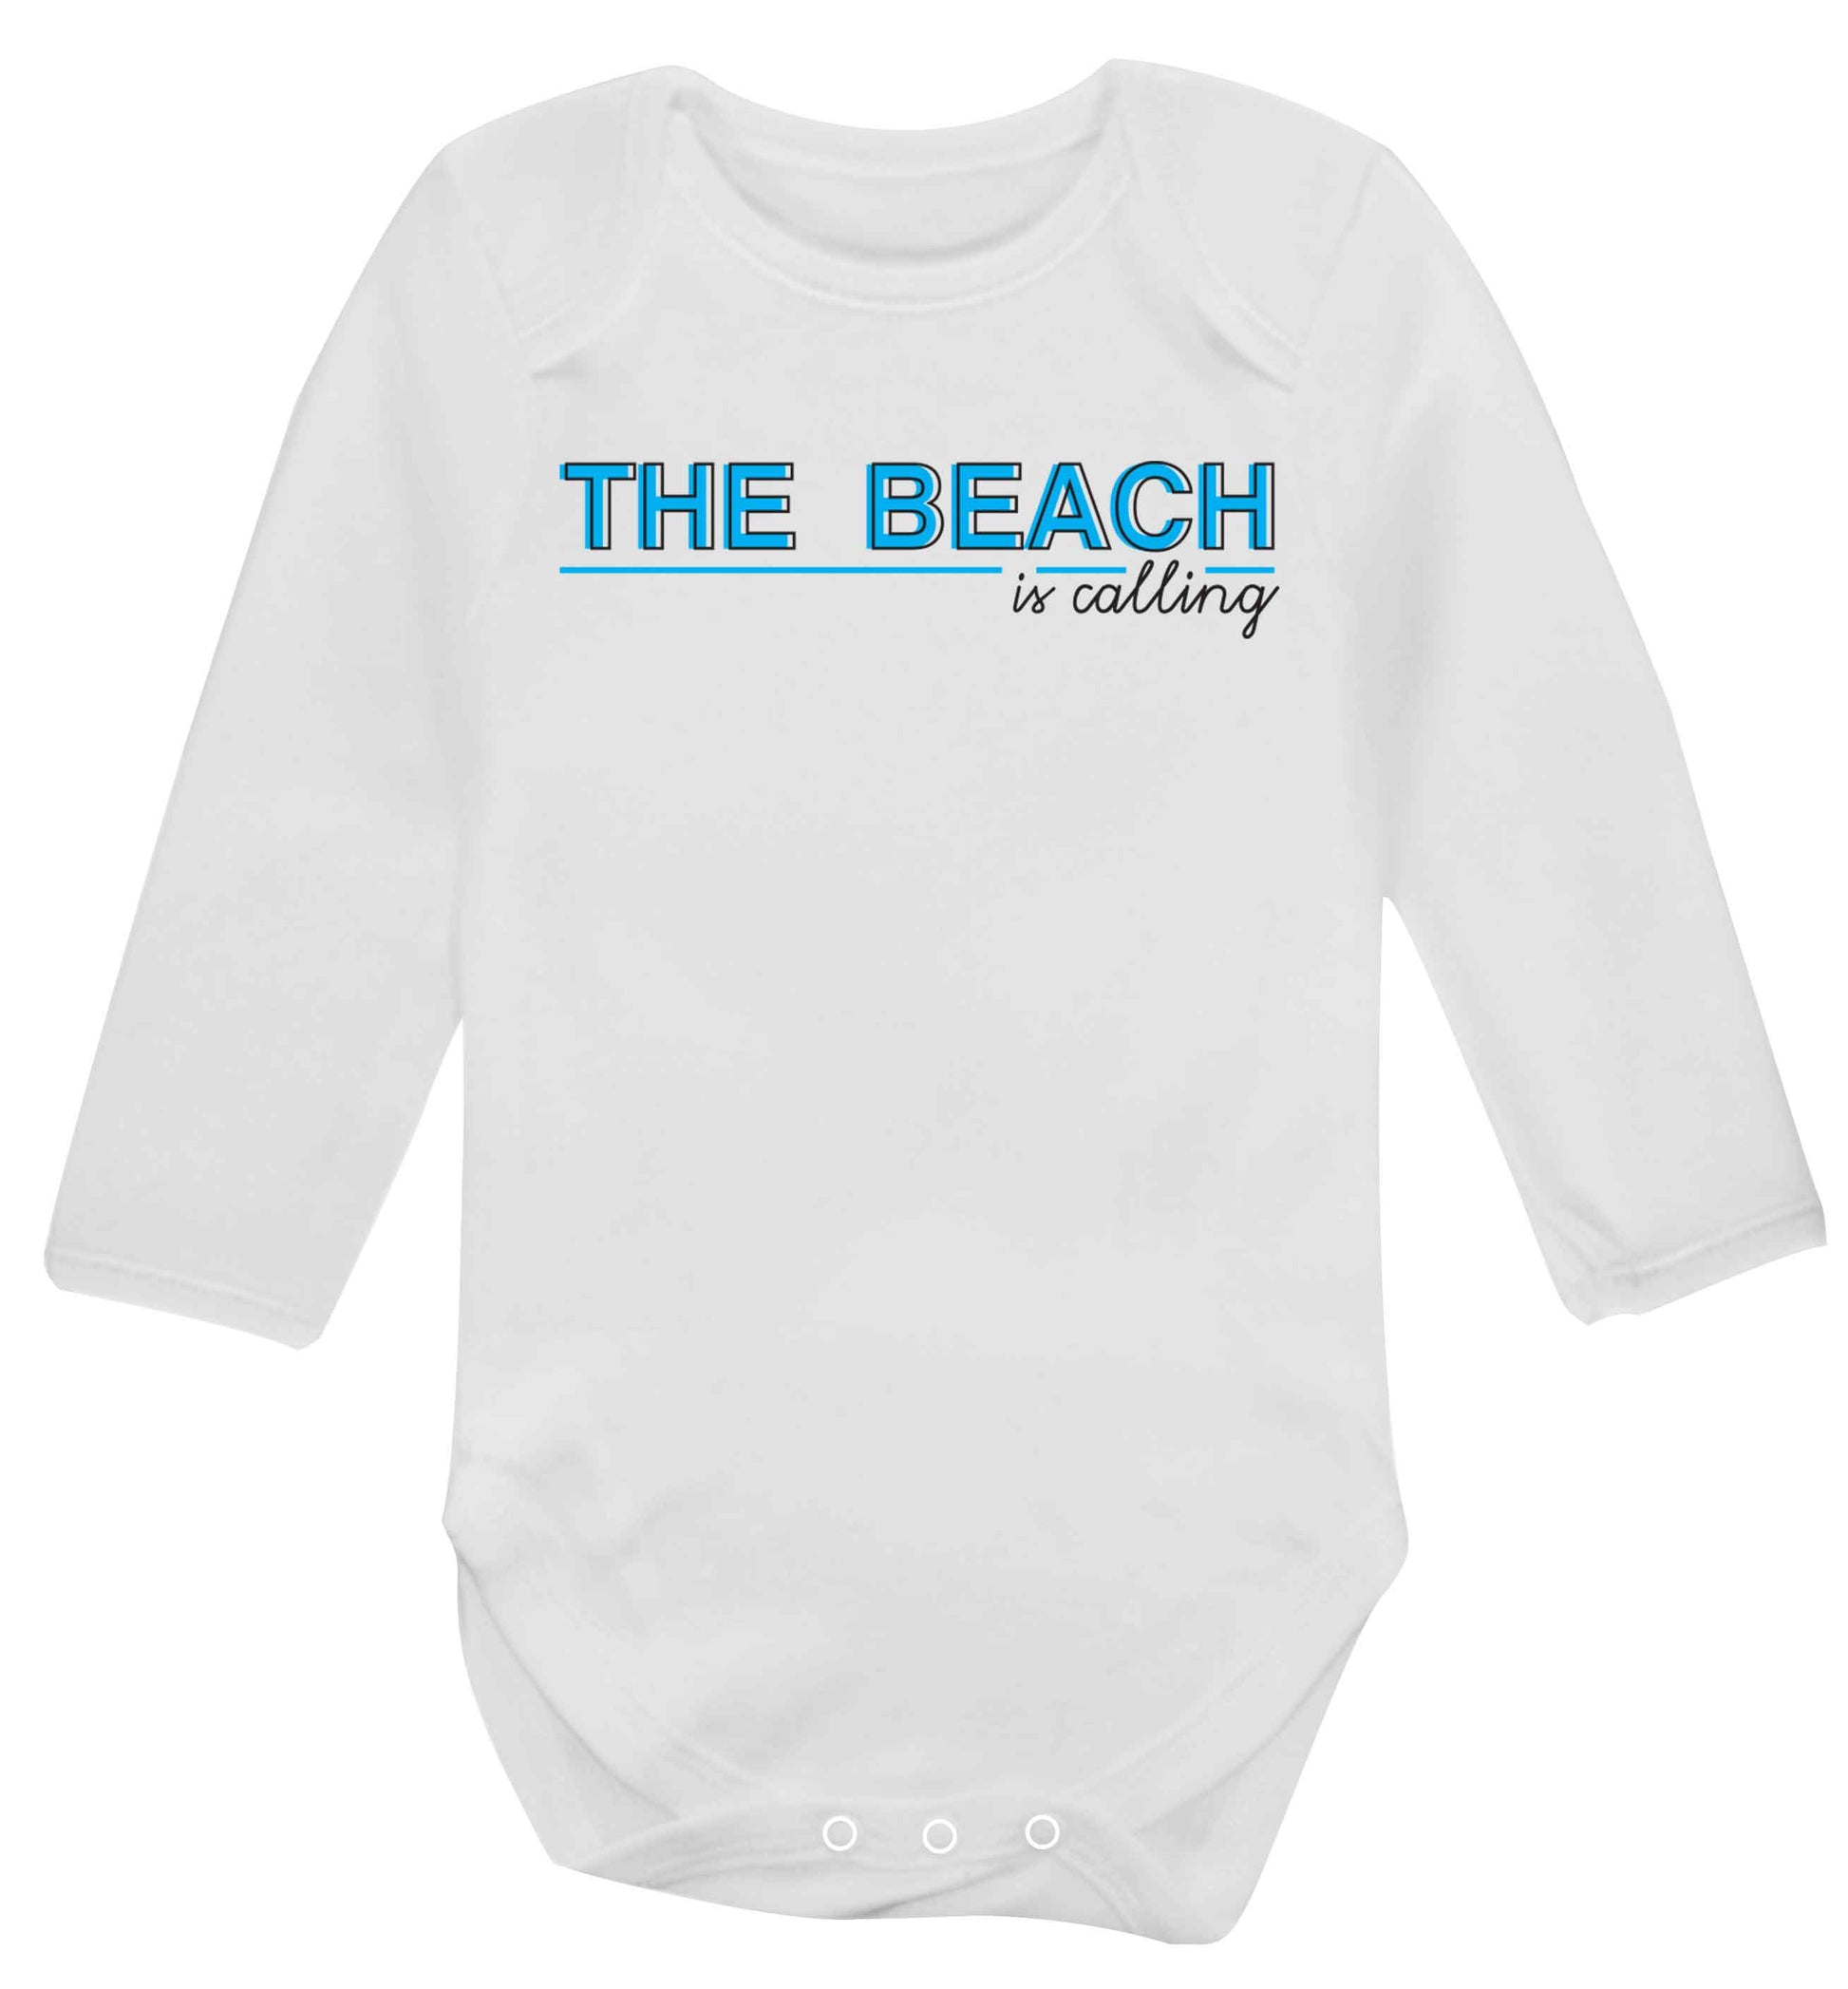 The beach is calling Baby Vest long sleeved white 6-12 months